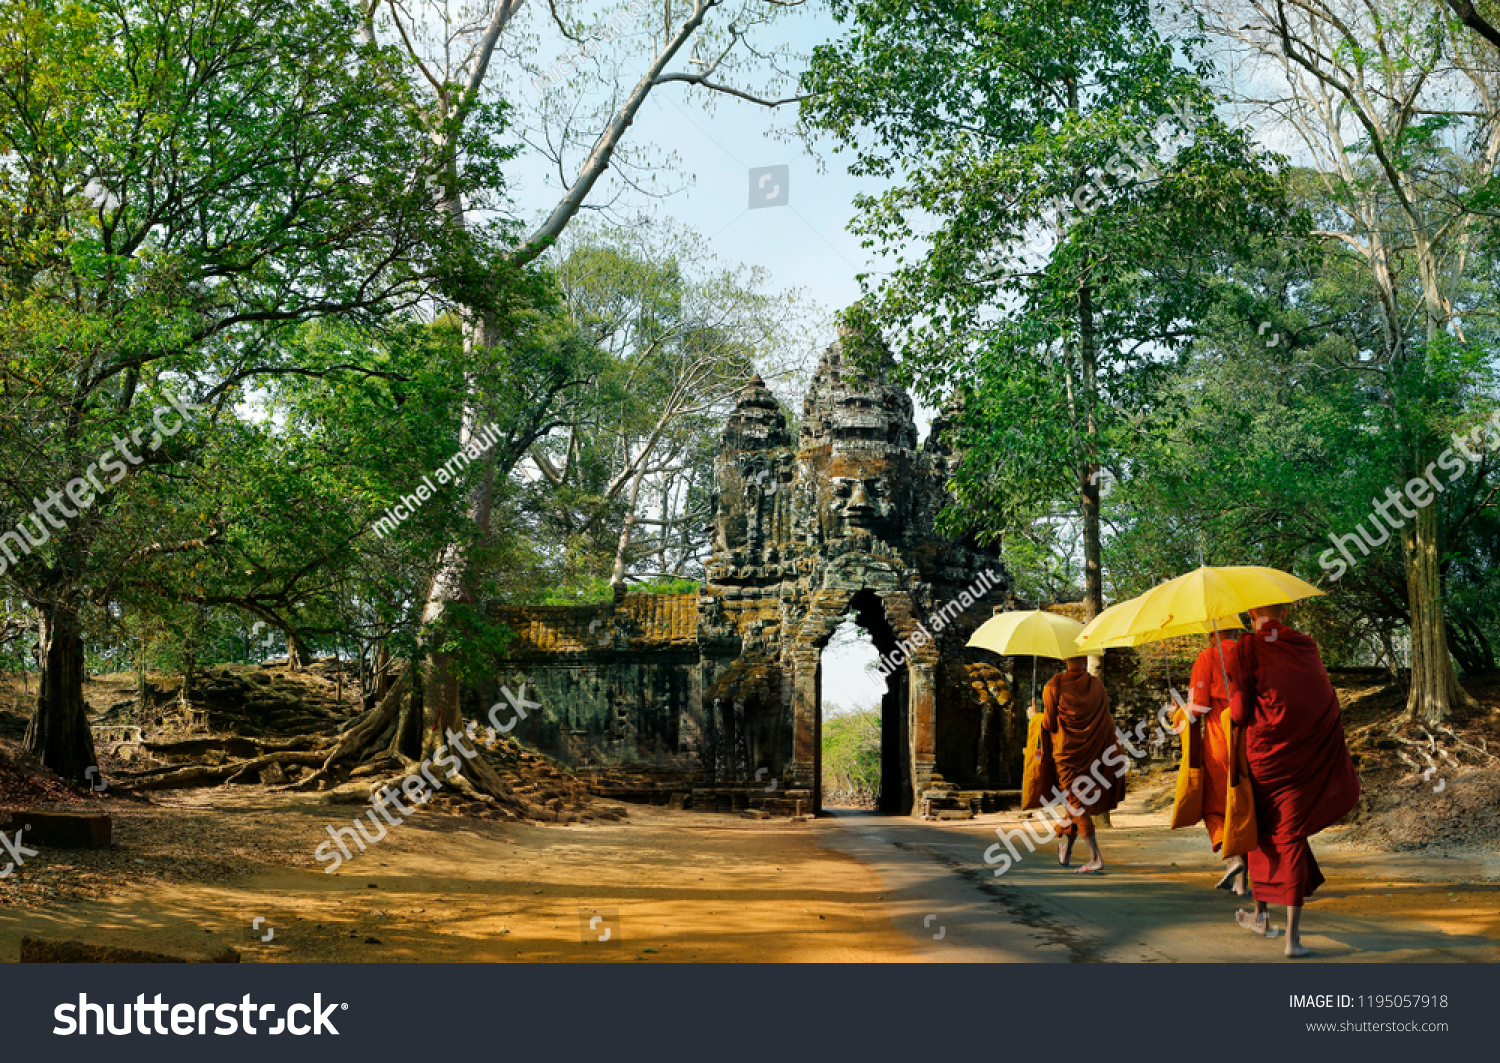 monks with umbrella walking in Angkor wat temple,Cambodia #1195057918